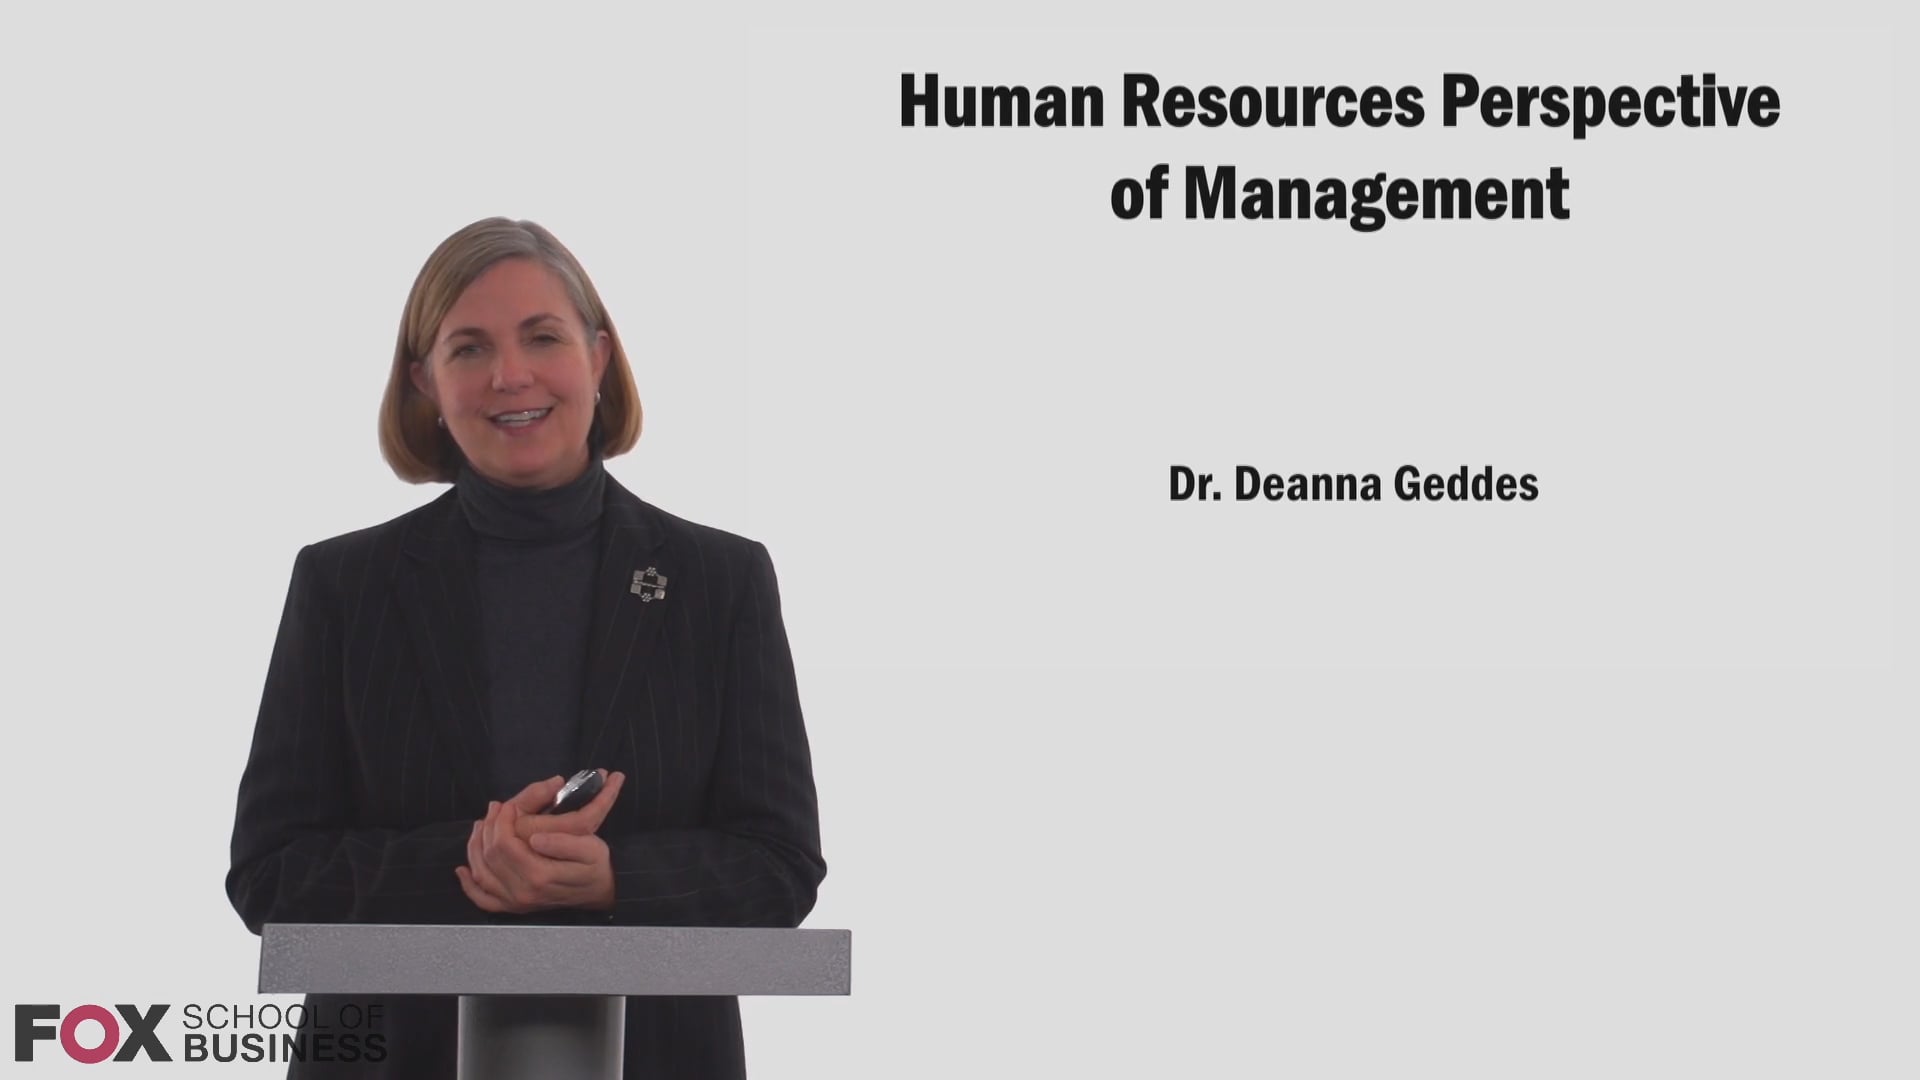 Human Resources Perspective of Management